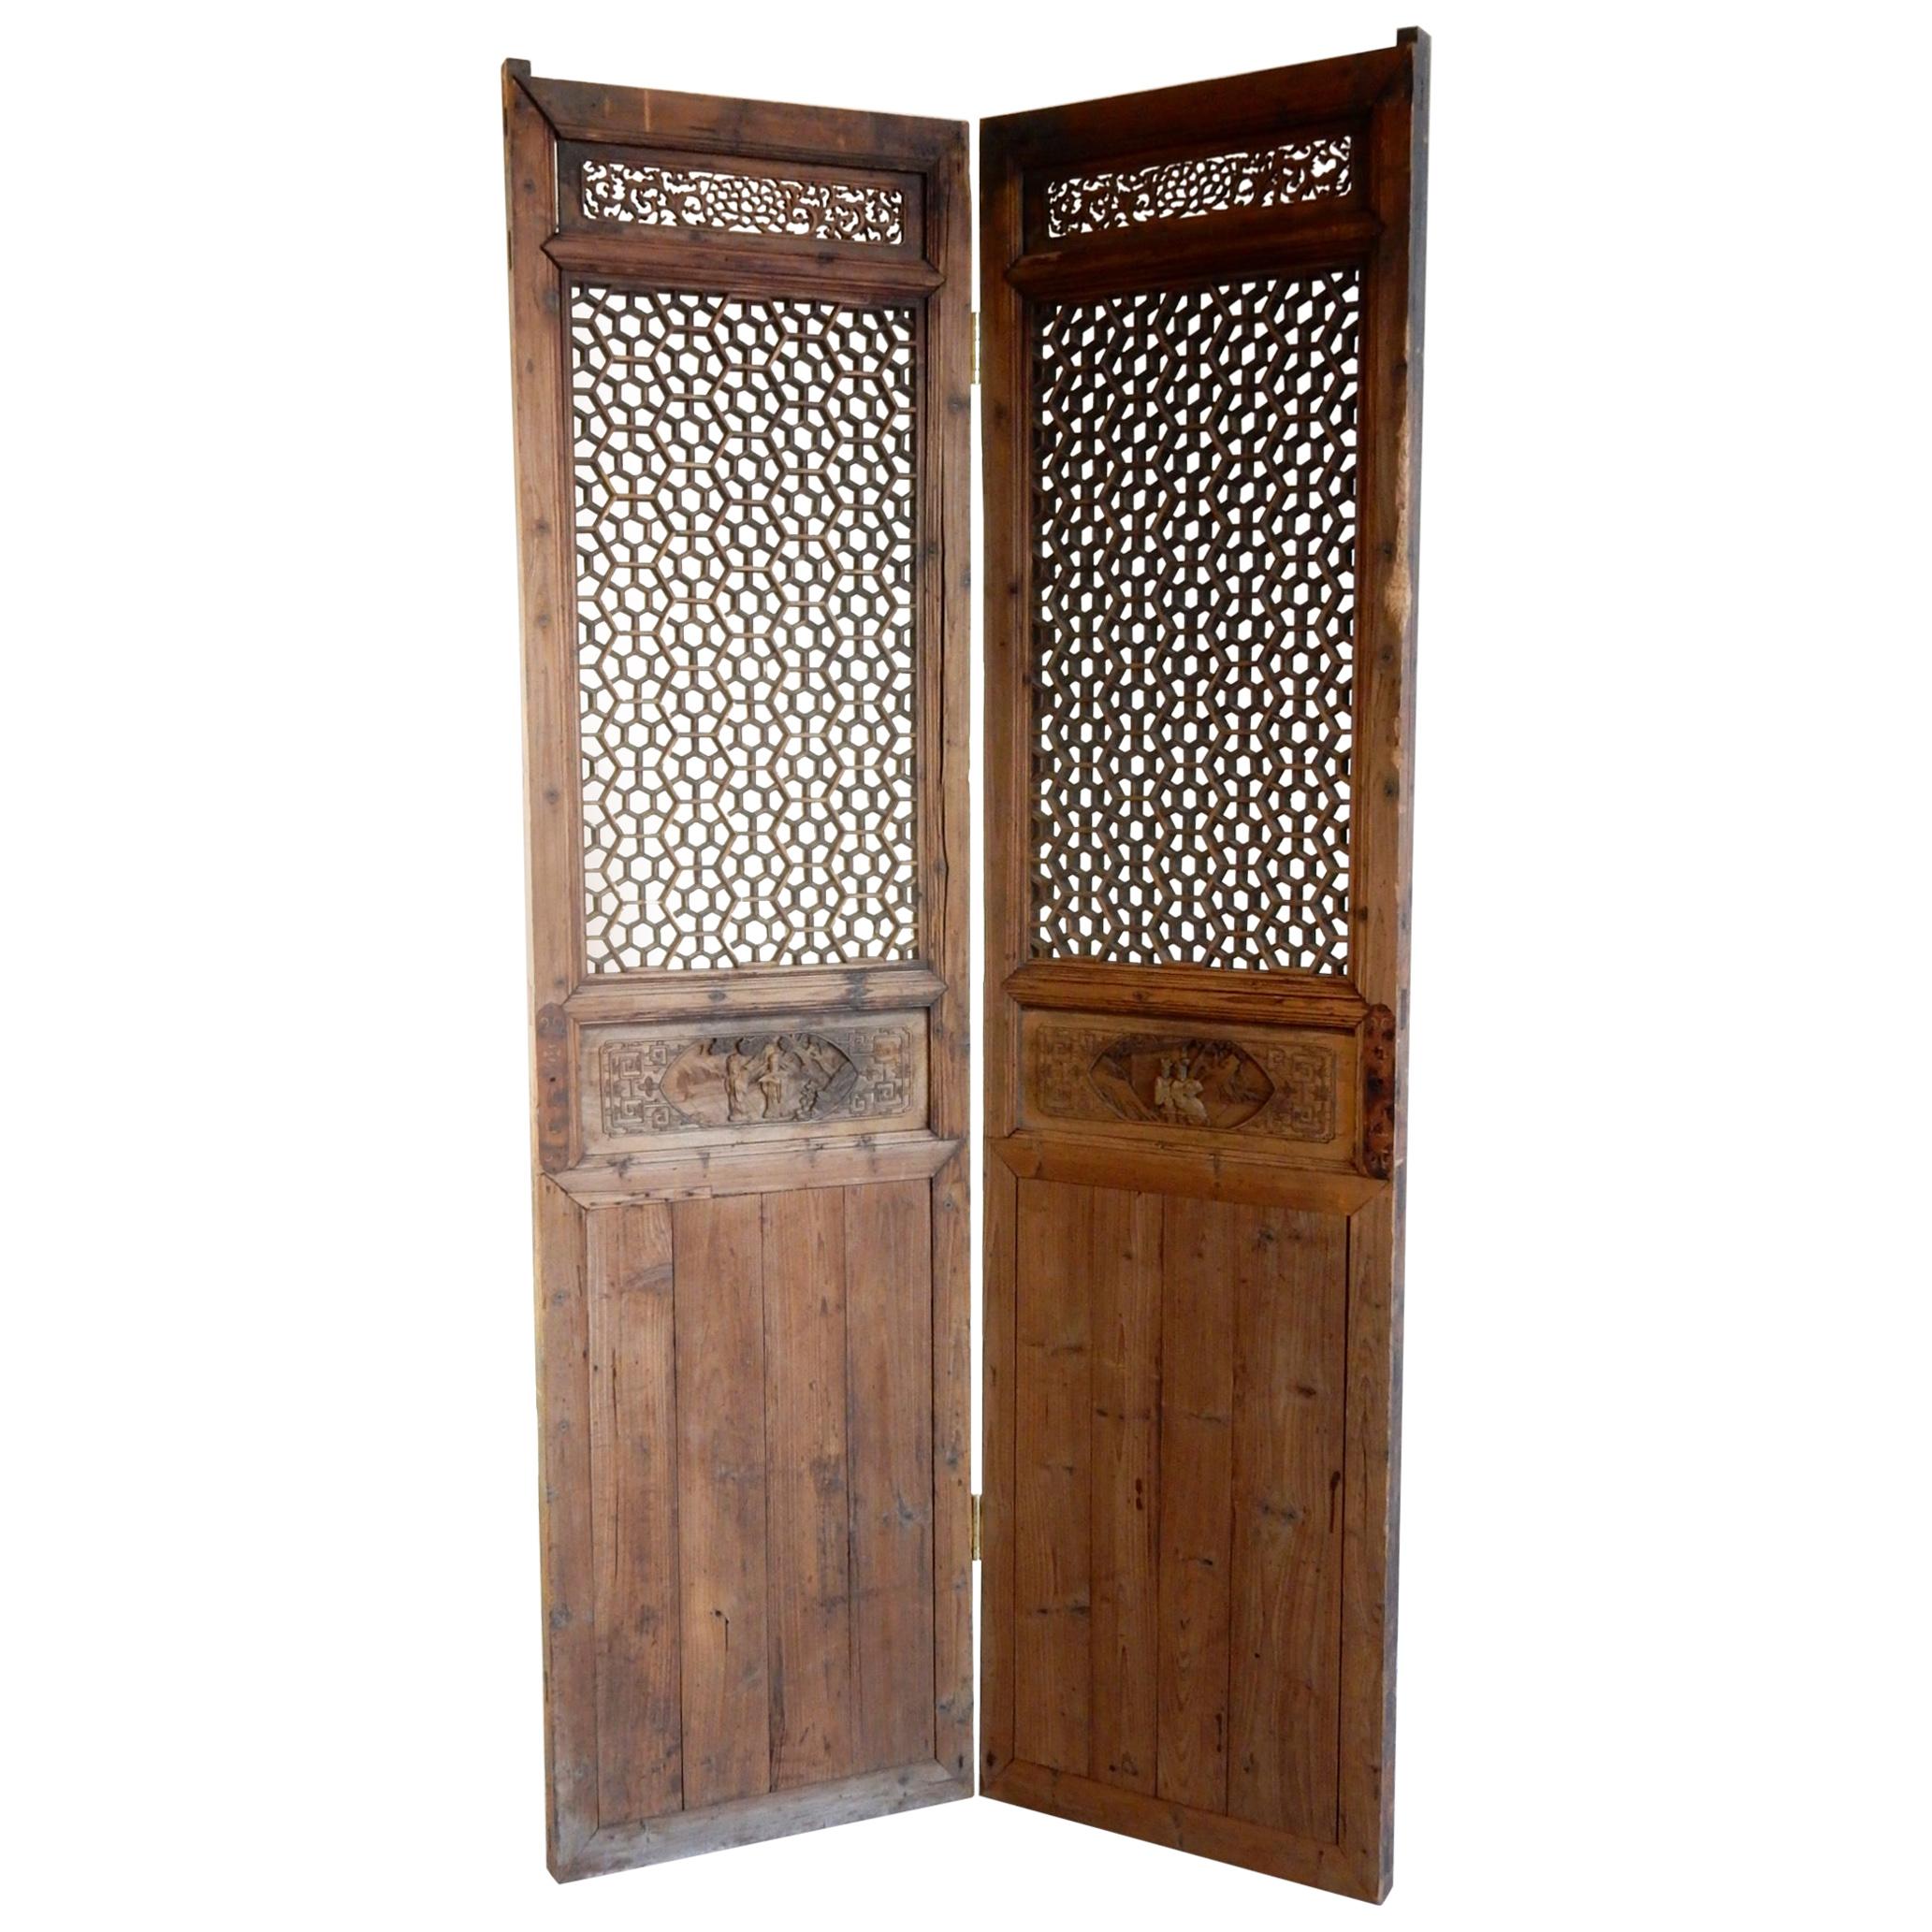 Antique Chinese Lattice Entry Doors, Room Divider Screen